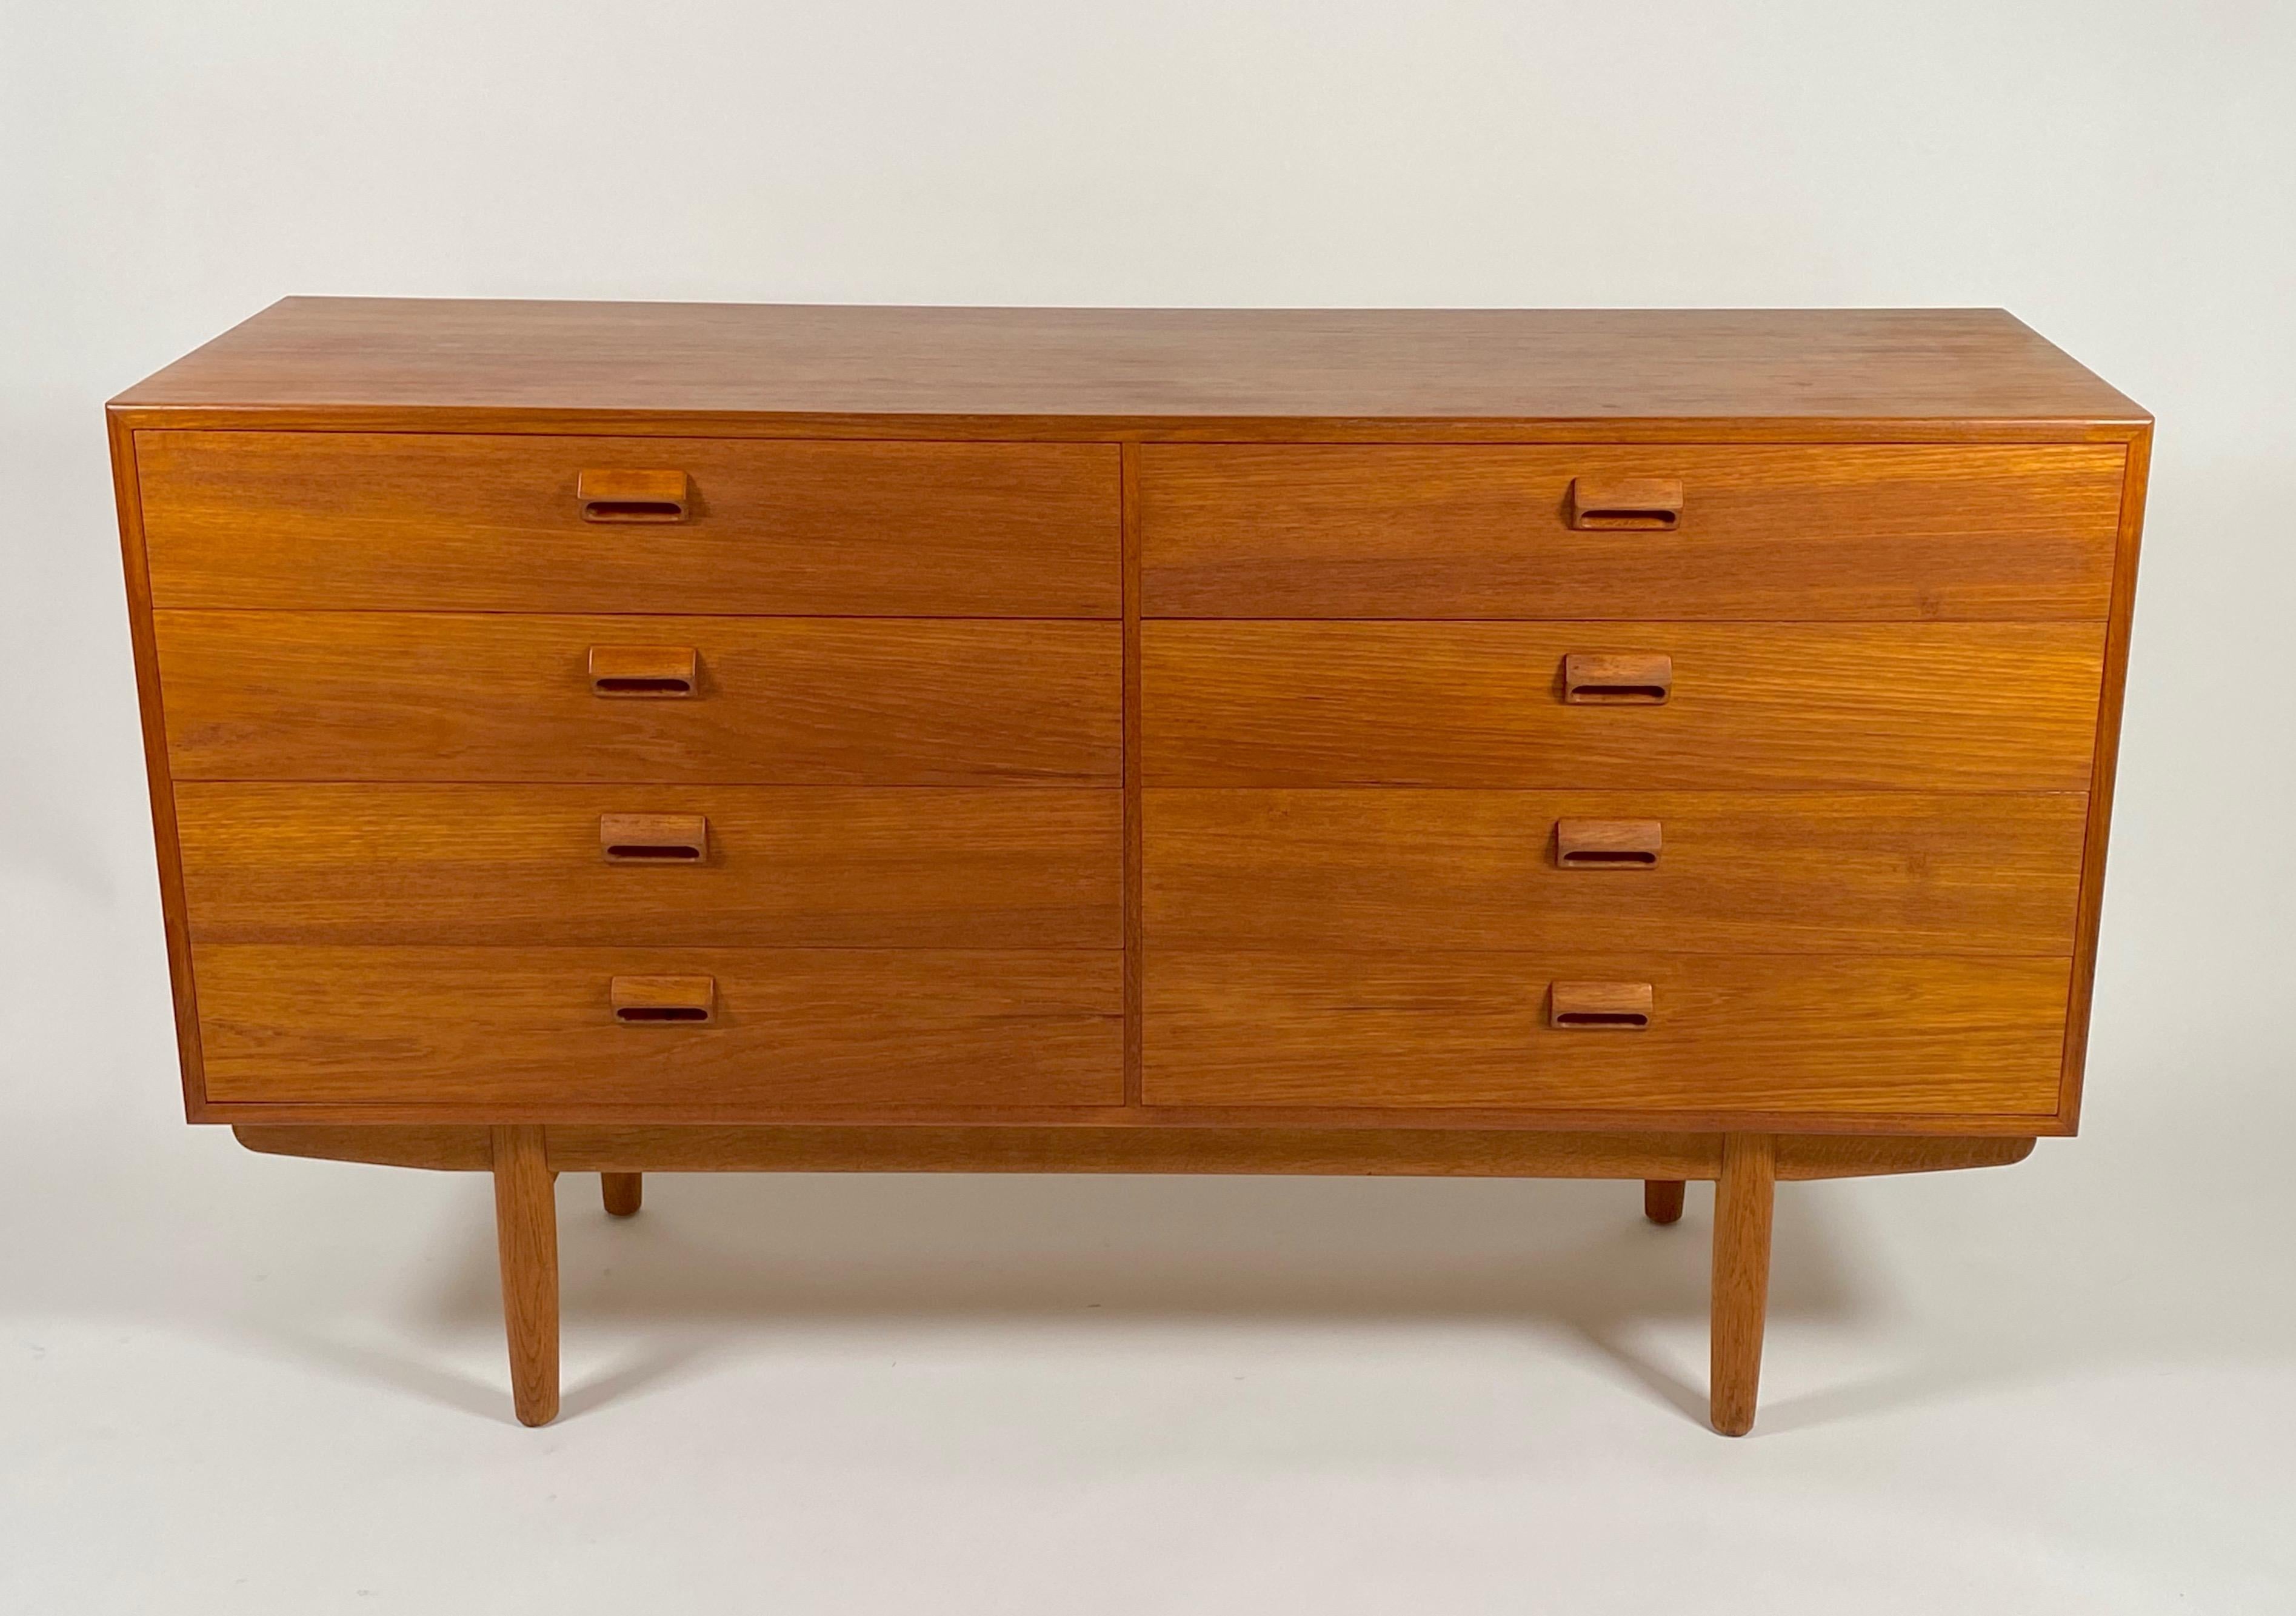 Eight drawer dresser circa 1950s by Danish designer Borge Mogensen (1914-1972). Construction is of old growth teak and the secondary construction is of solid birch. The pulls are carved out of solid teak, resting on a sled base with tapered dowel